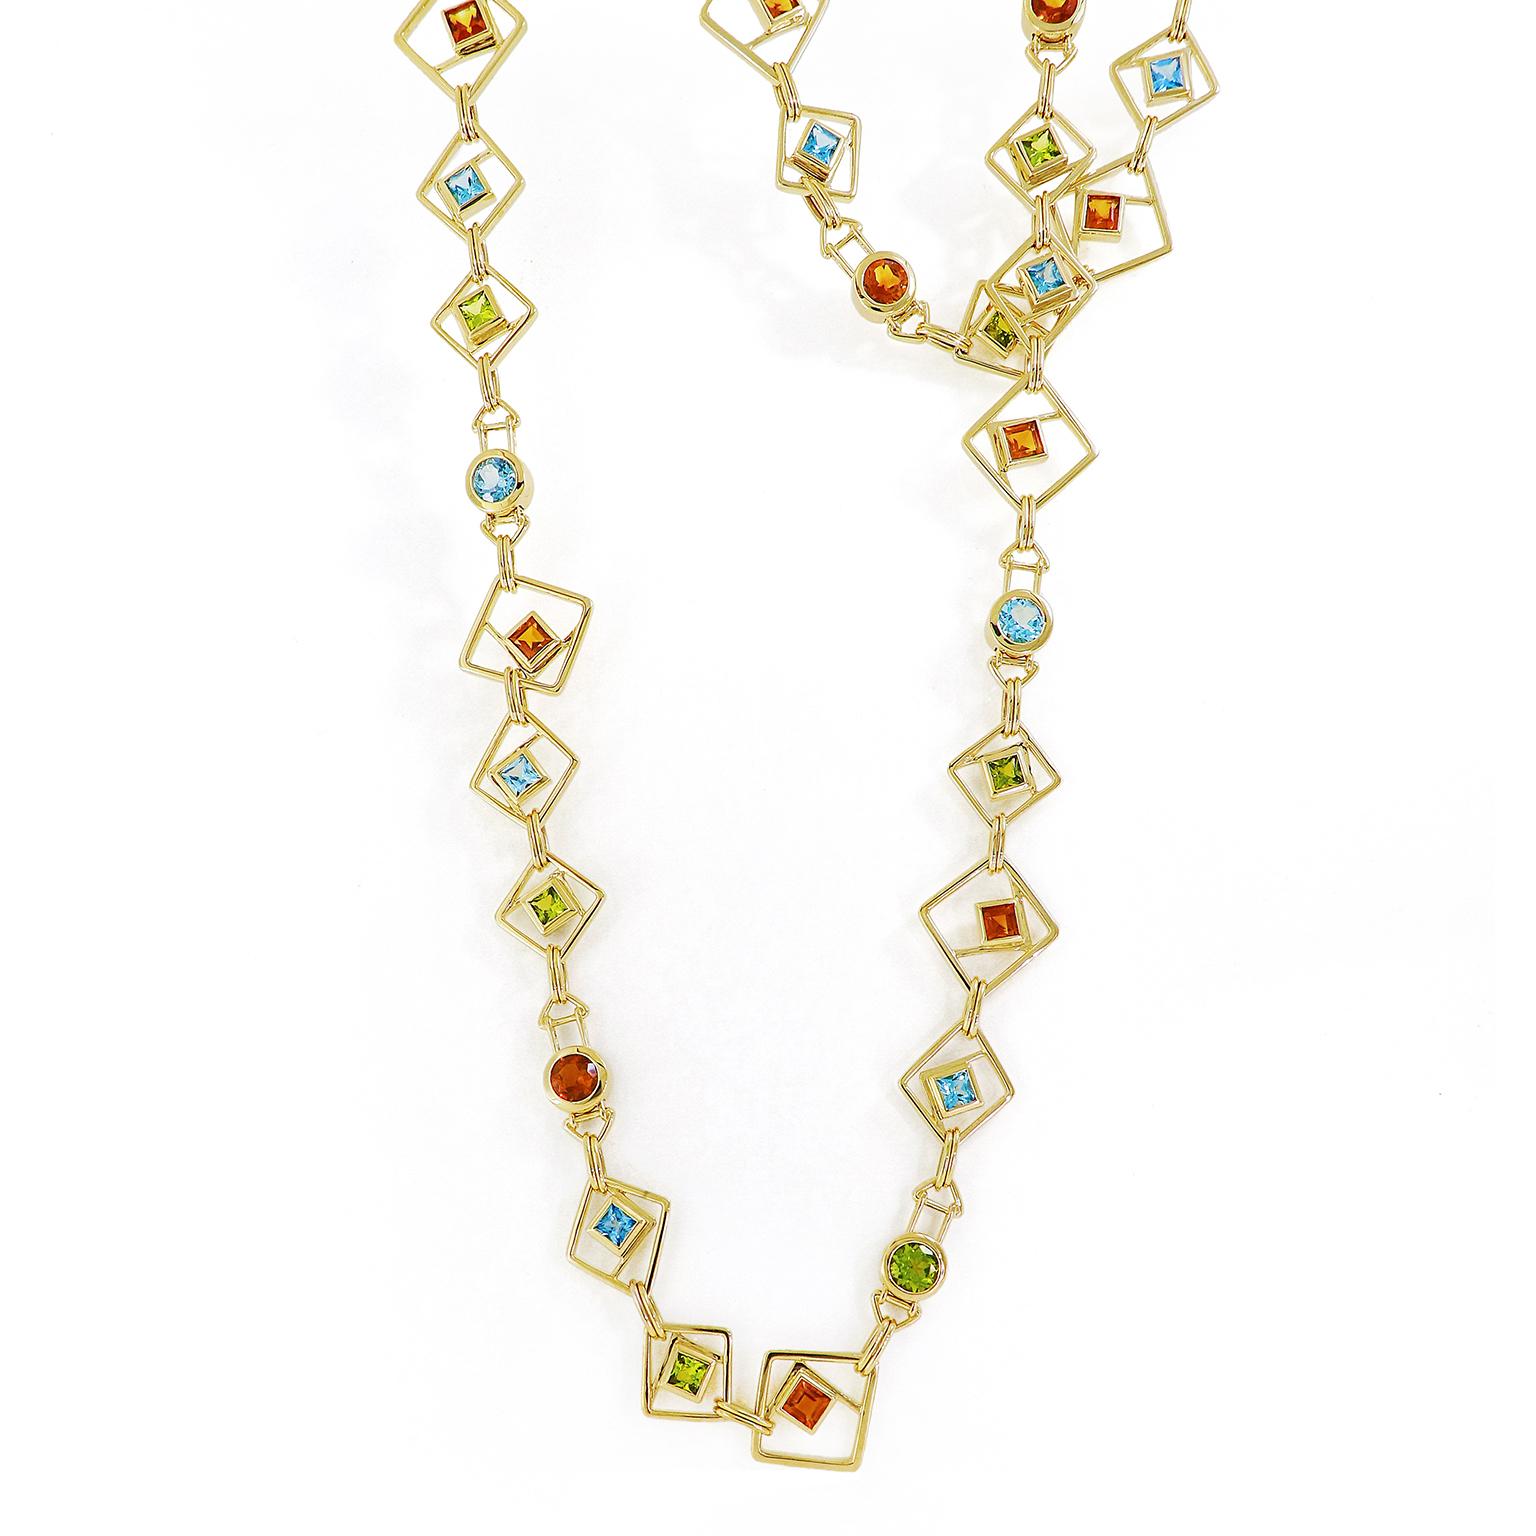 Peridot, blue topaz, and citrine form a harmonizing trio of colors as they glisten alongside rich 18k yellow gold. Geometric shapes add interest to the pattern of this necklace. The design features 18k yellow gold wires forming three squares turned